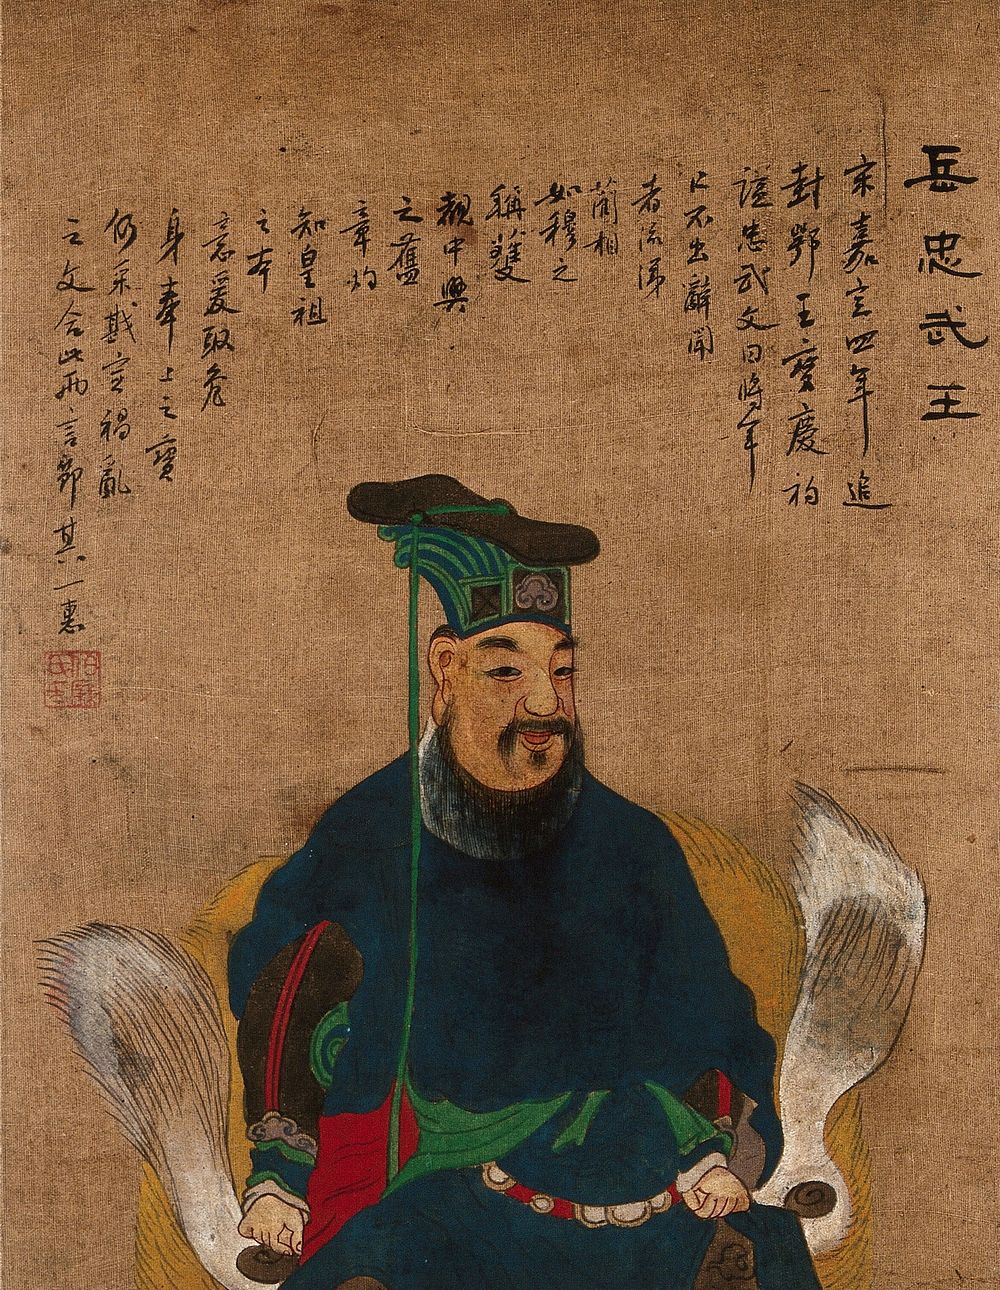 A Chinese man. Painting by a Chinese artist, ca. 1850.